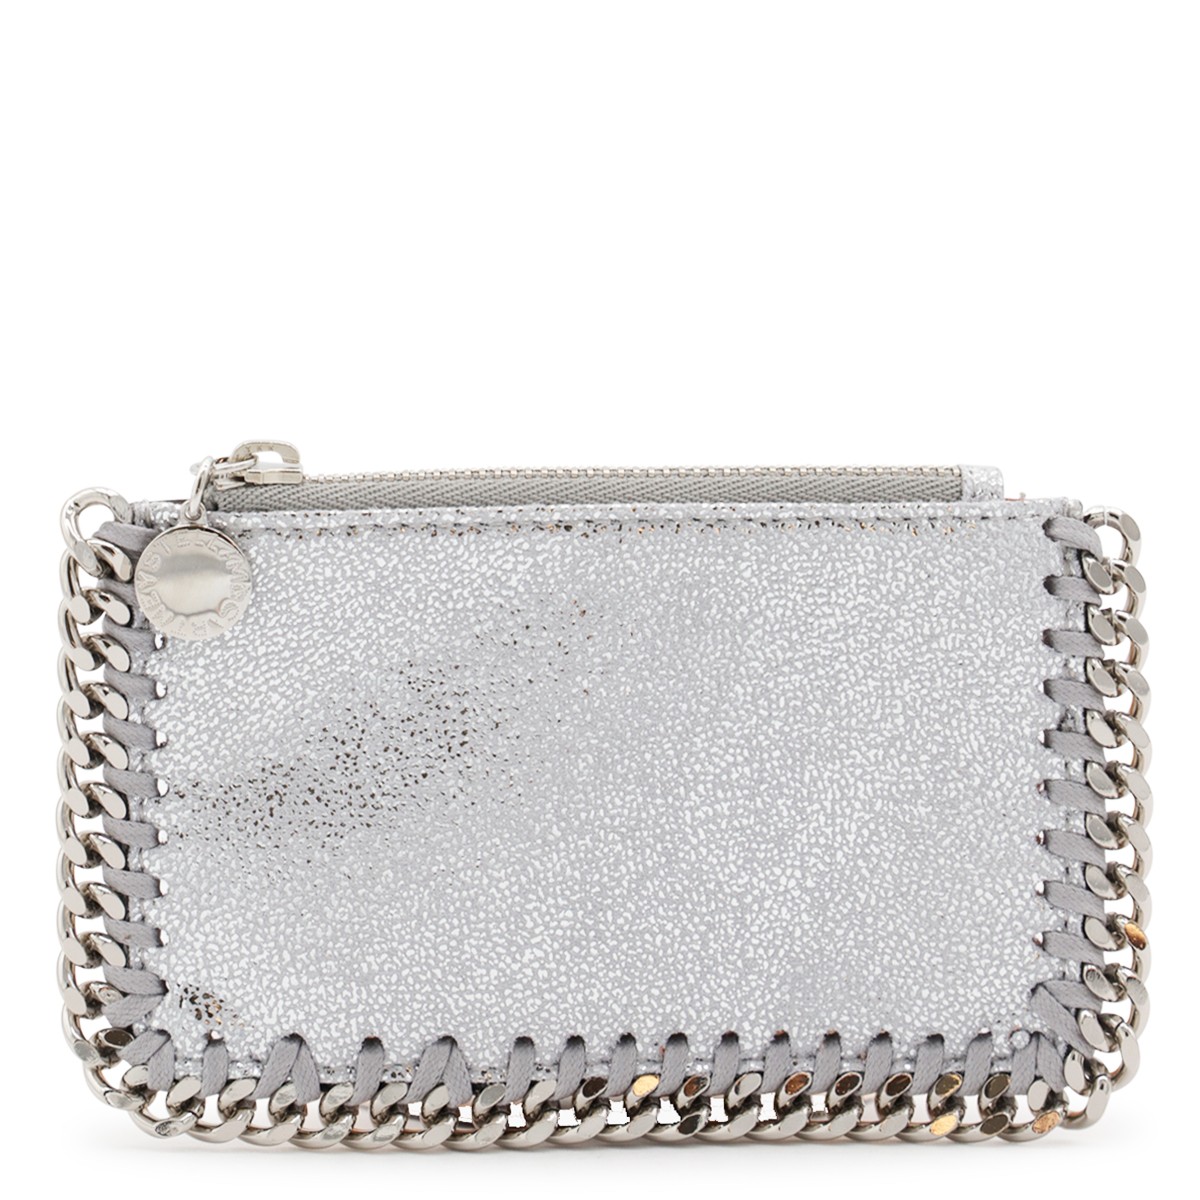 SILVER METAL FAUX LEATHER FALABELLA CARD HOLDER